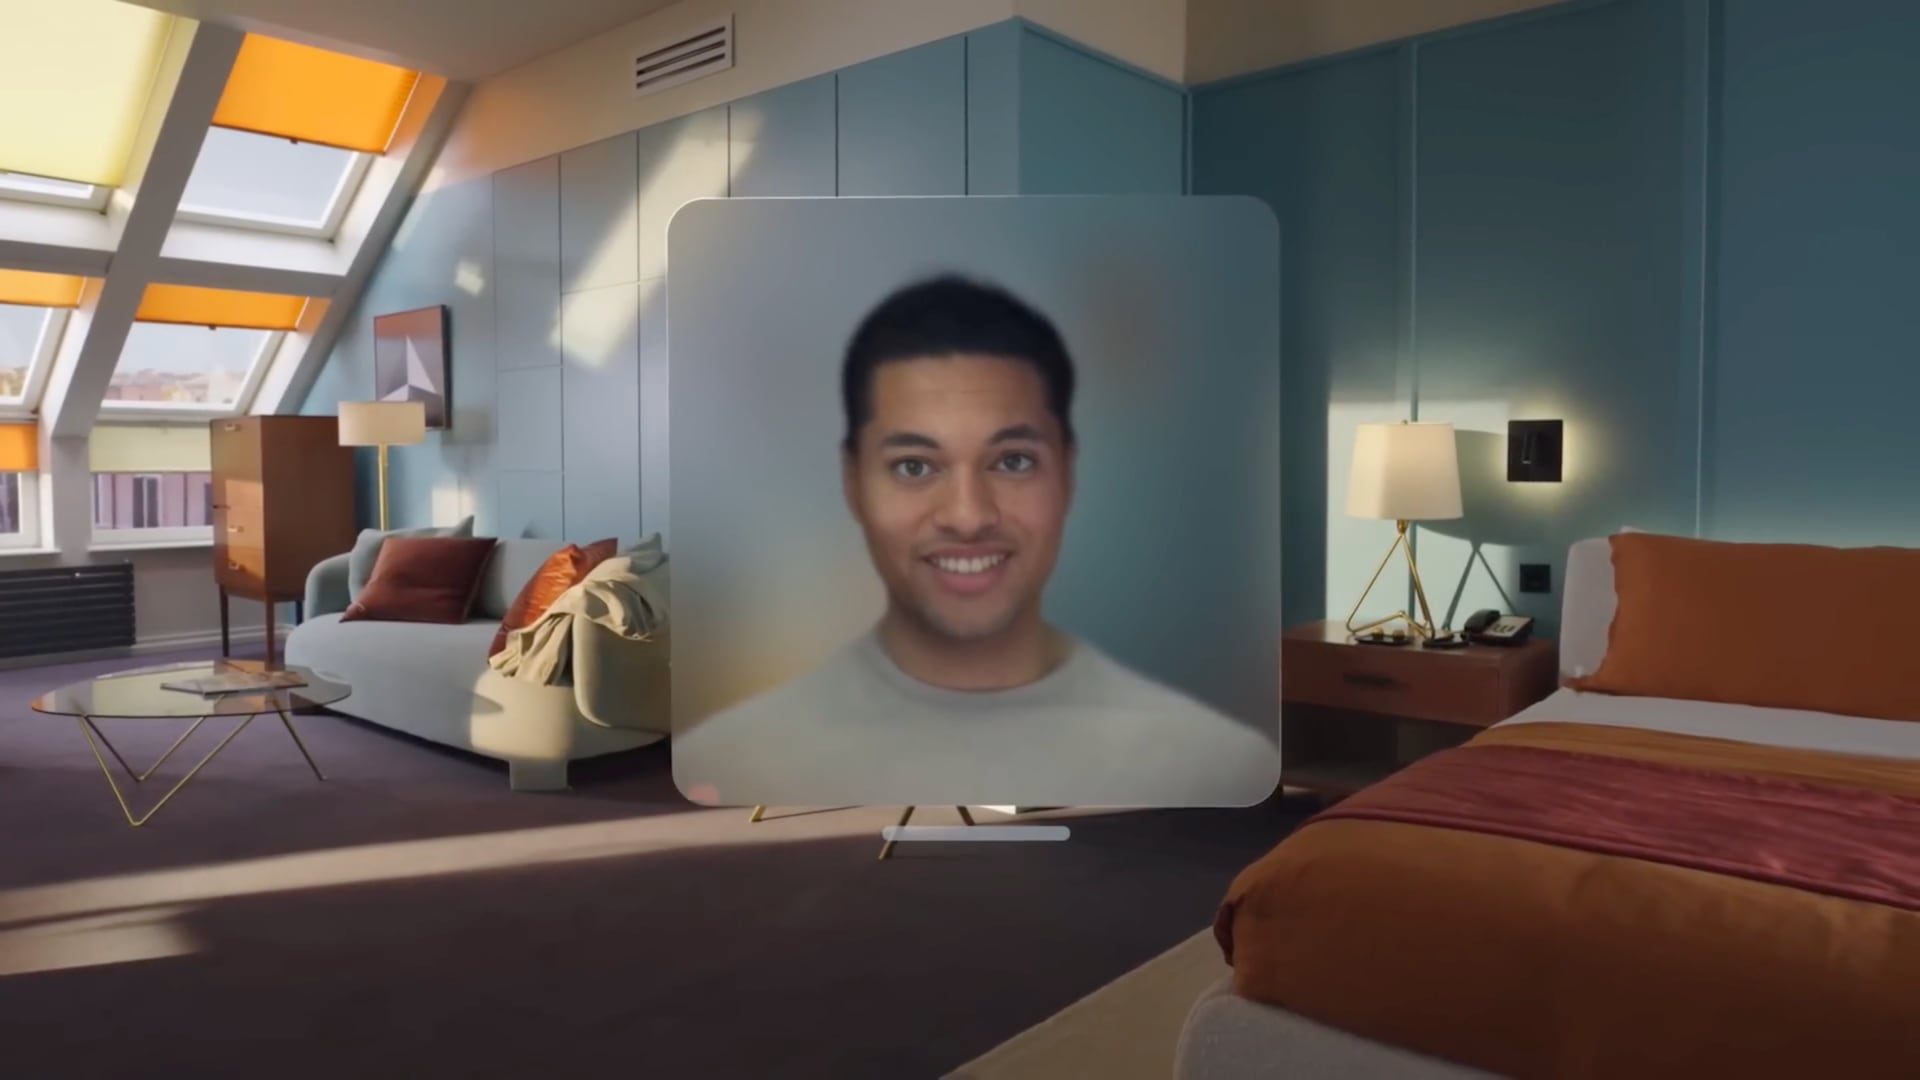 The Vision Pro’s Persona feature for video conferencing will launch in beta